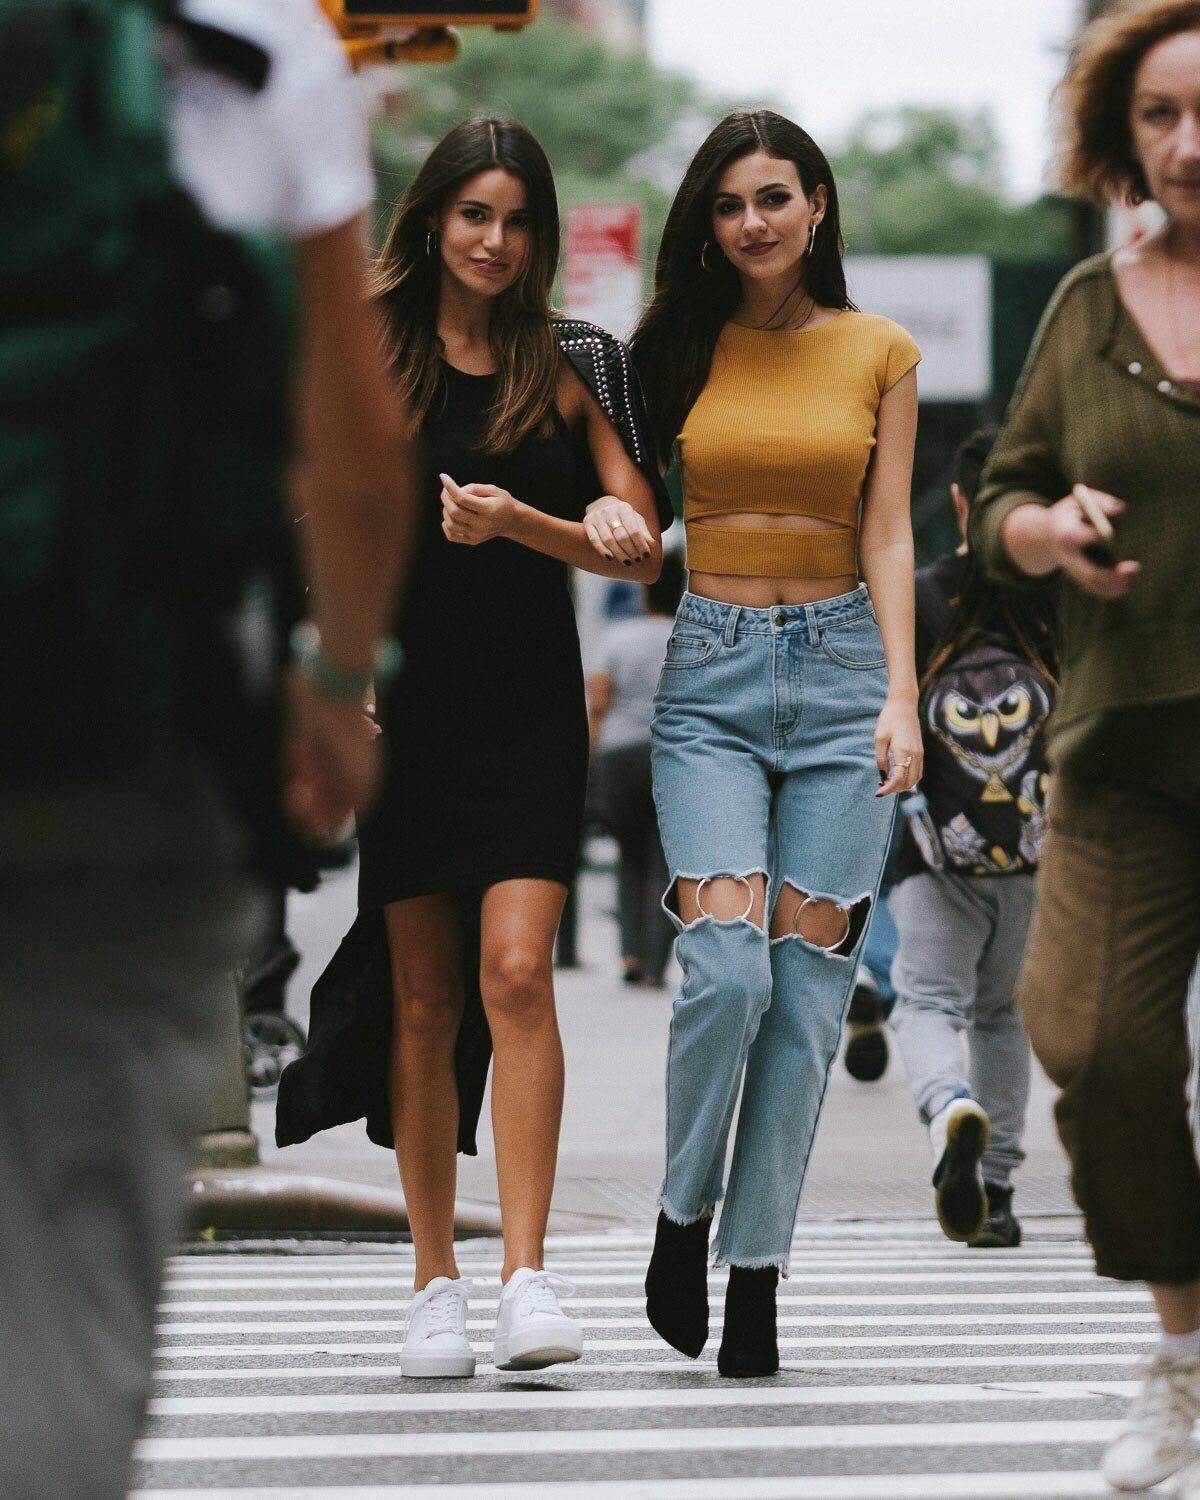 Victoria Justice and Madison Reed on the Set of a Photoshoot in New York, September 2018